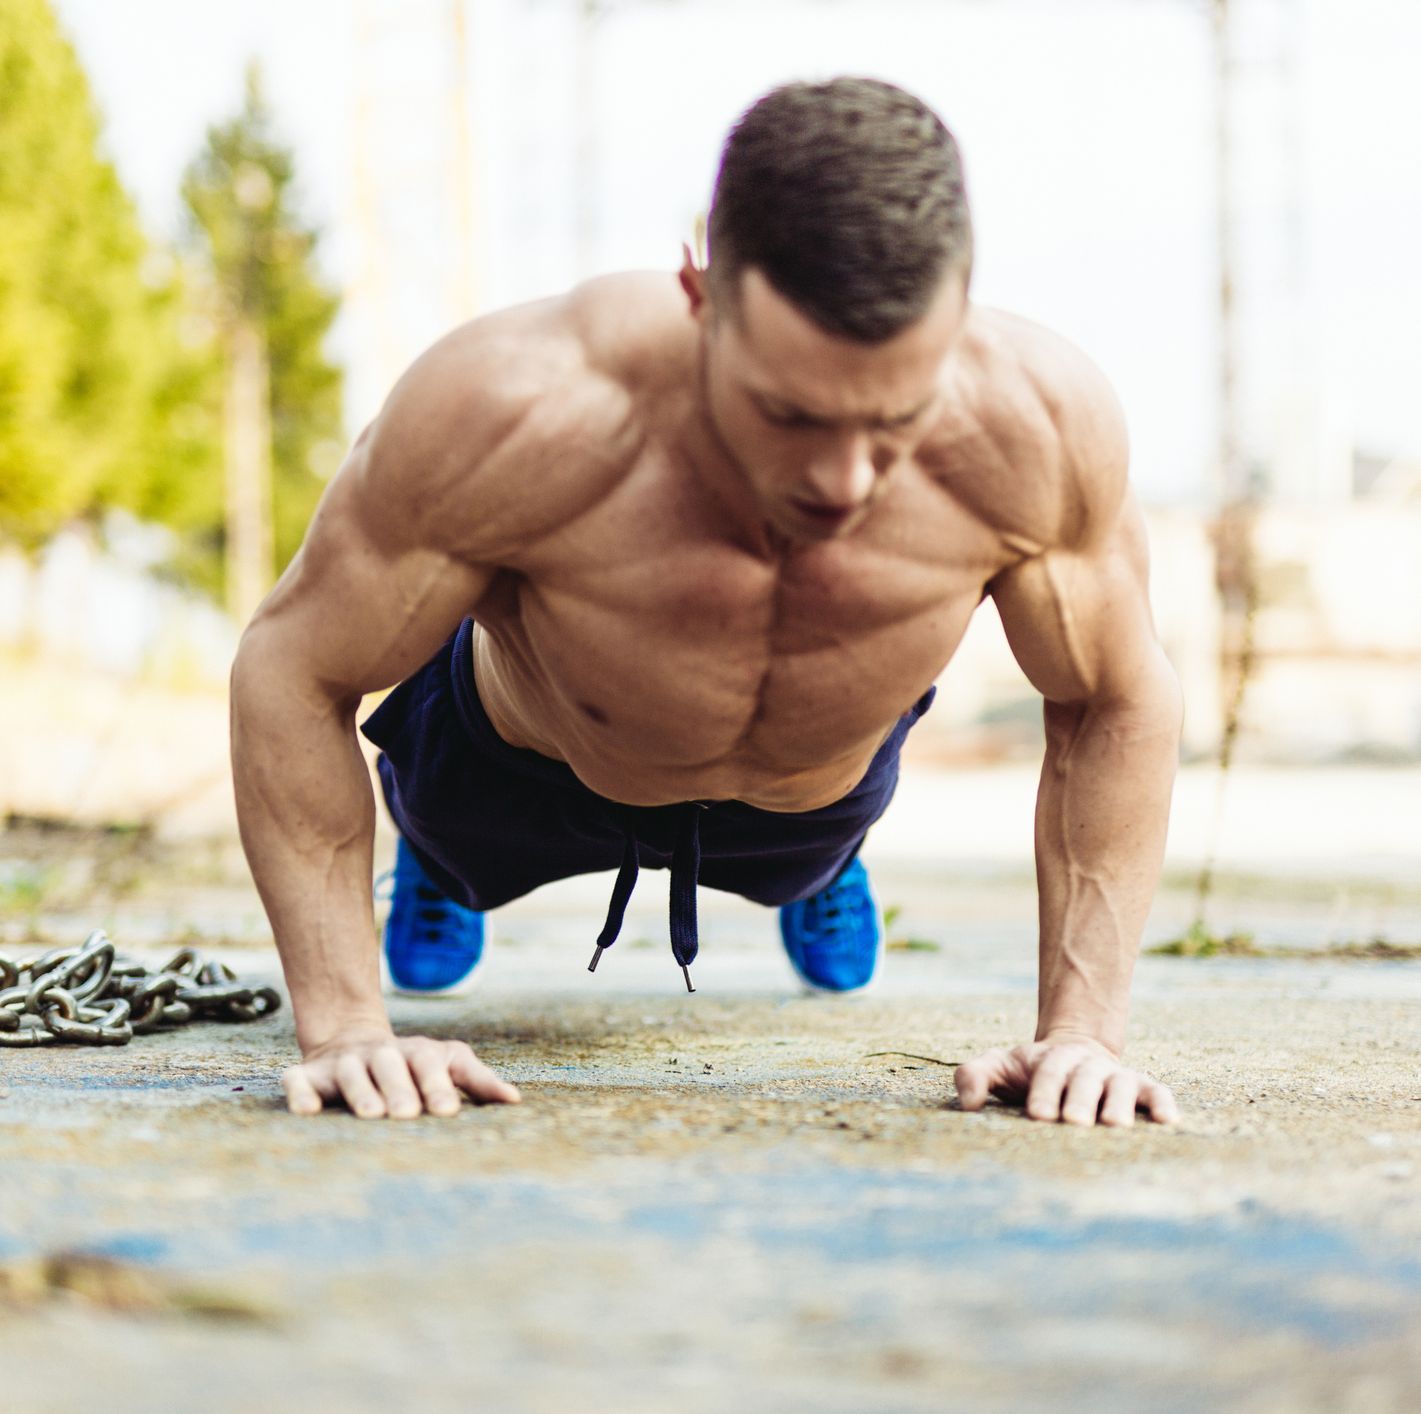 Try This Pushup Power Plan to Pump Up Your Bodyweight Workouts